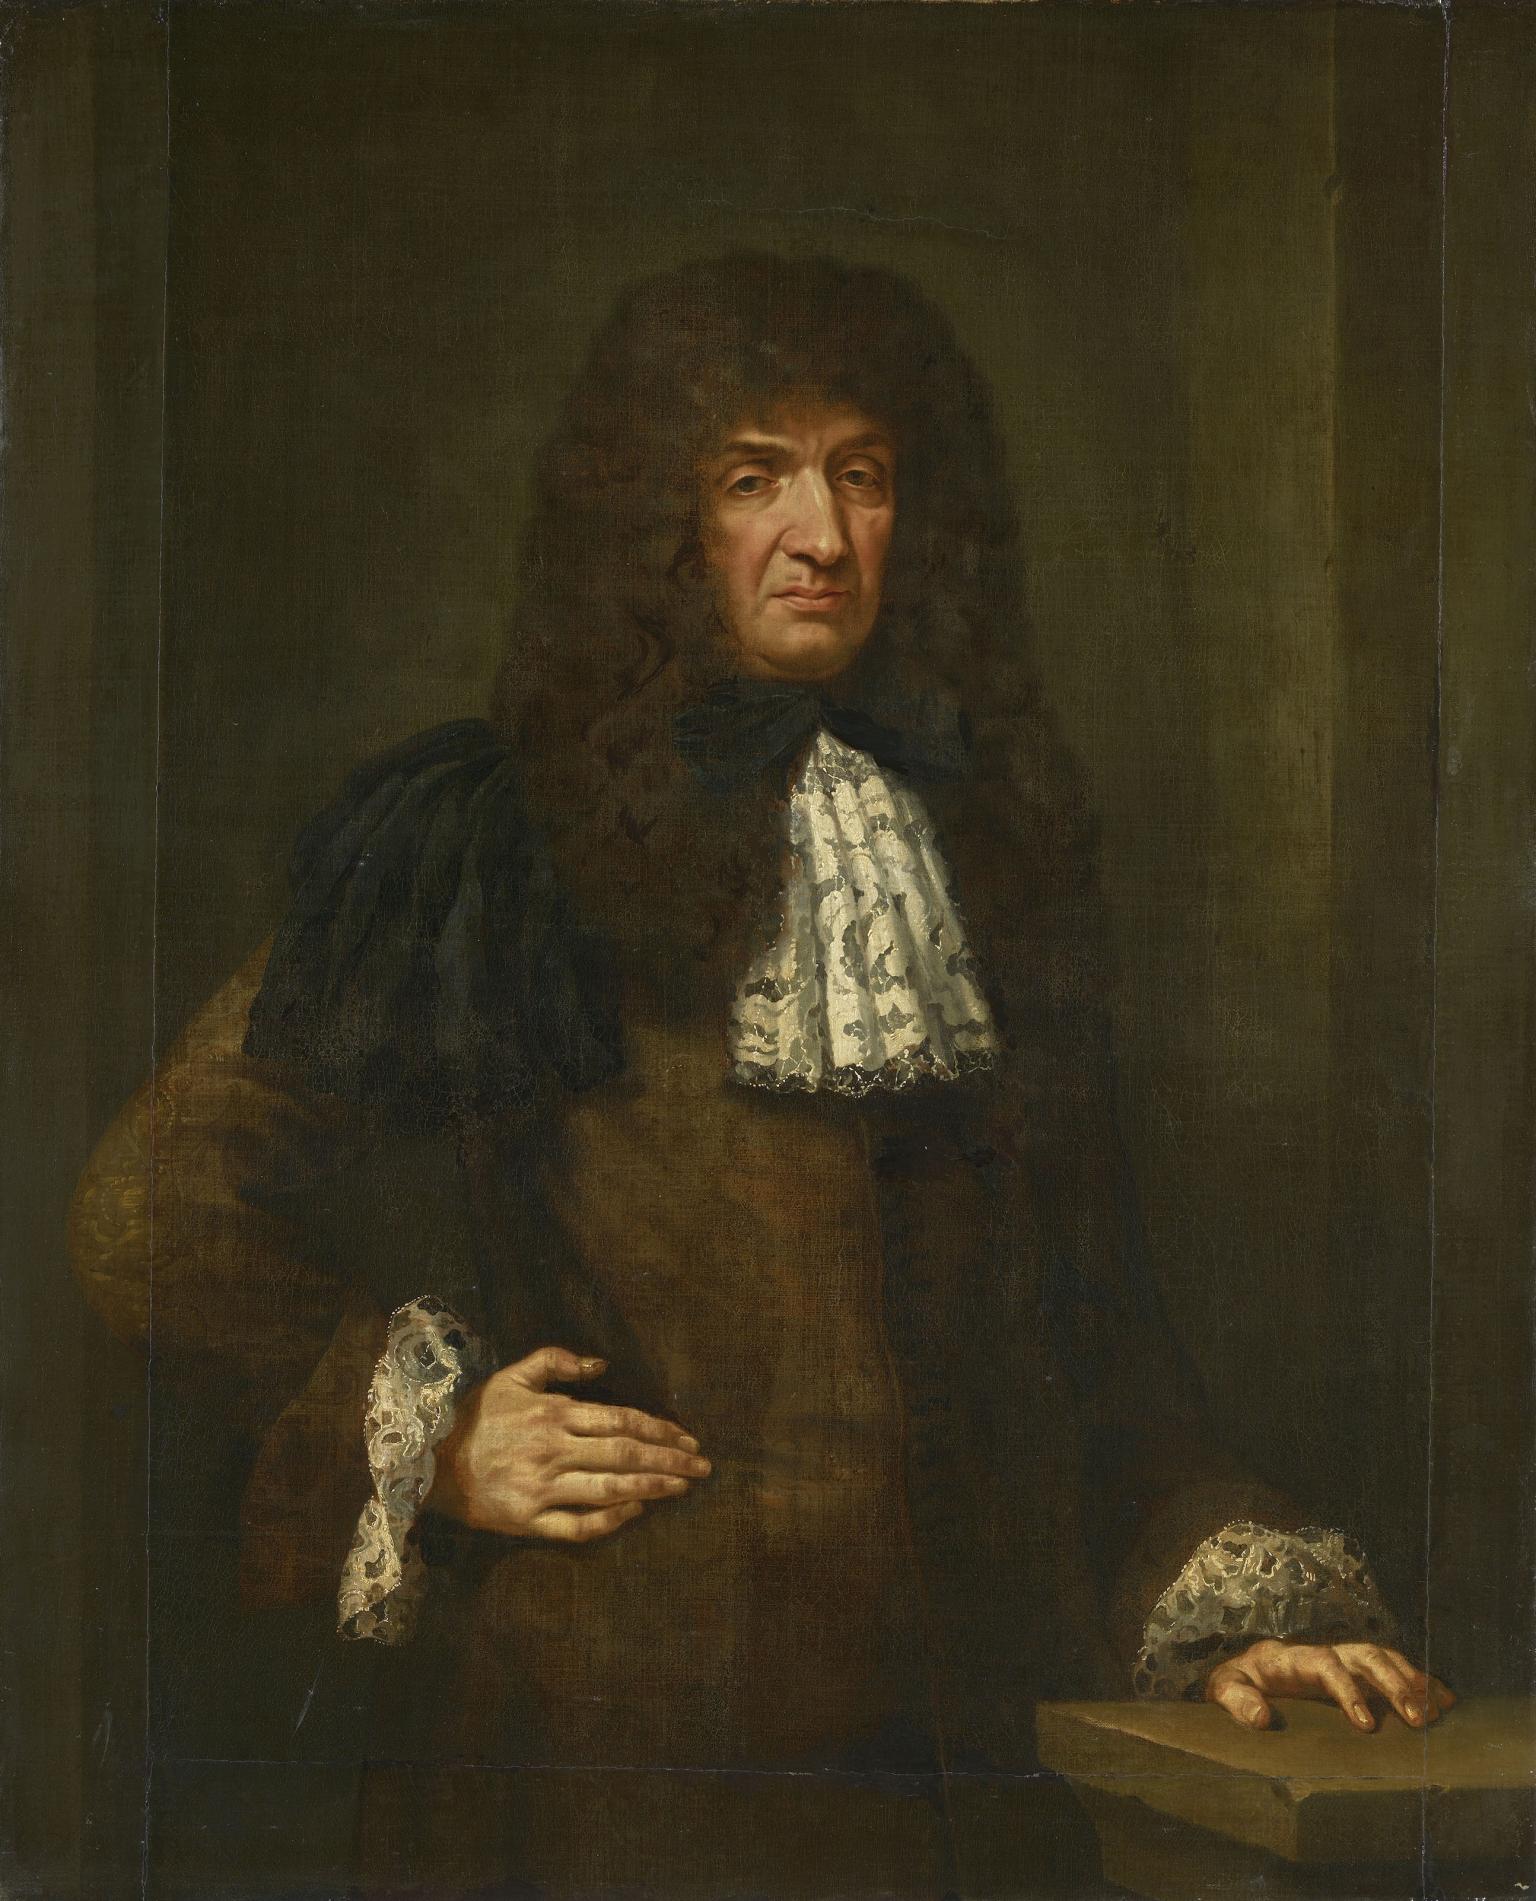 Portrait painting depicting man with long wavy hair standing facing viewer with right hand on hip, dressed in coat with lace cuffs and lace collar.